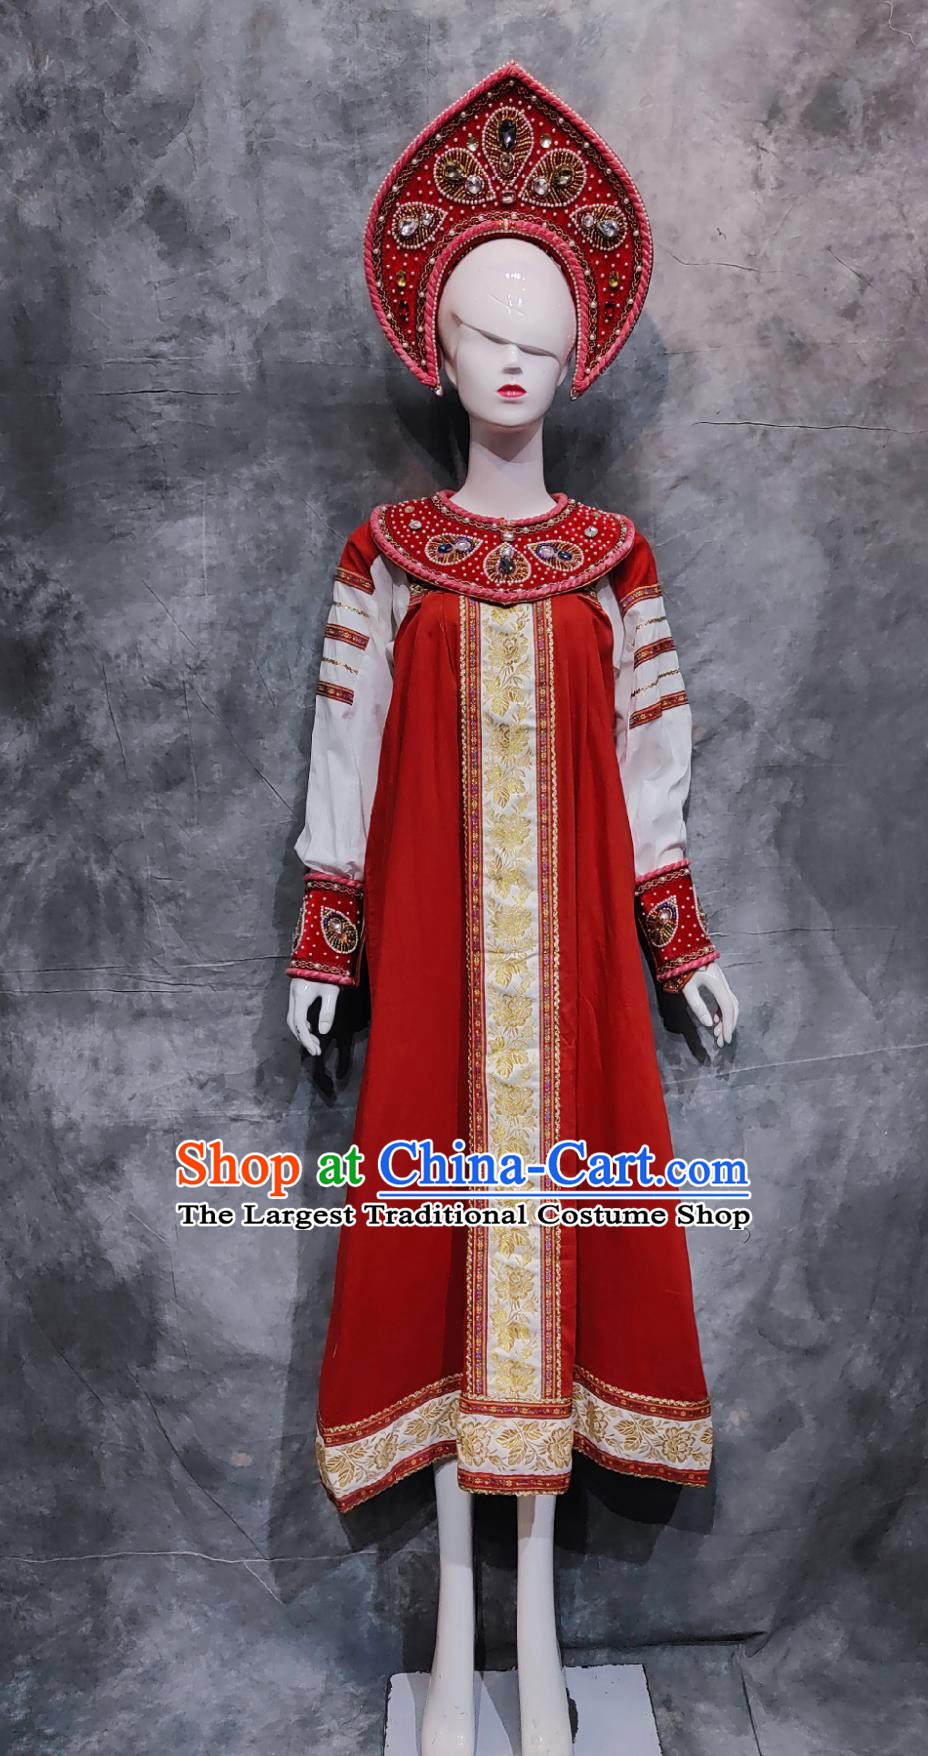 Chinese Russian Ethnic Woman Festival Clothing Xinjiang National Minority Stage Performance Red Dress China Traditional Dance Costume